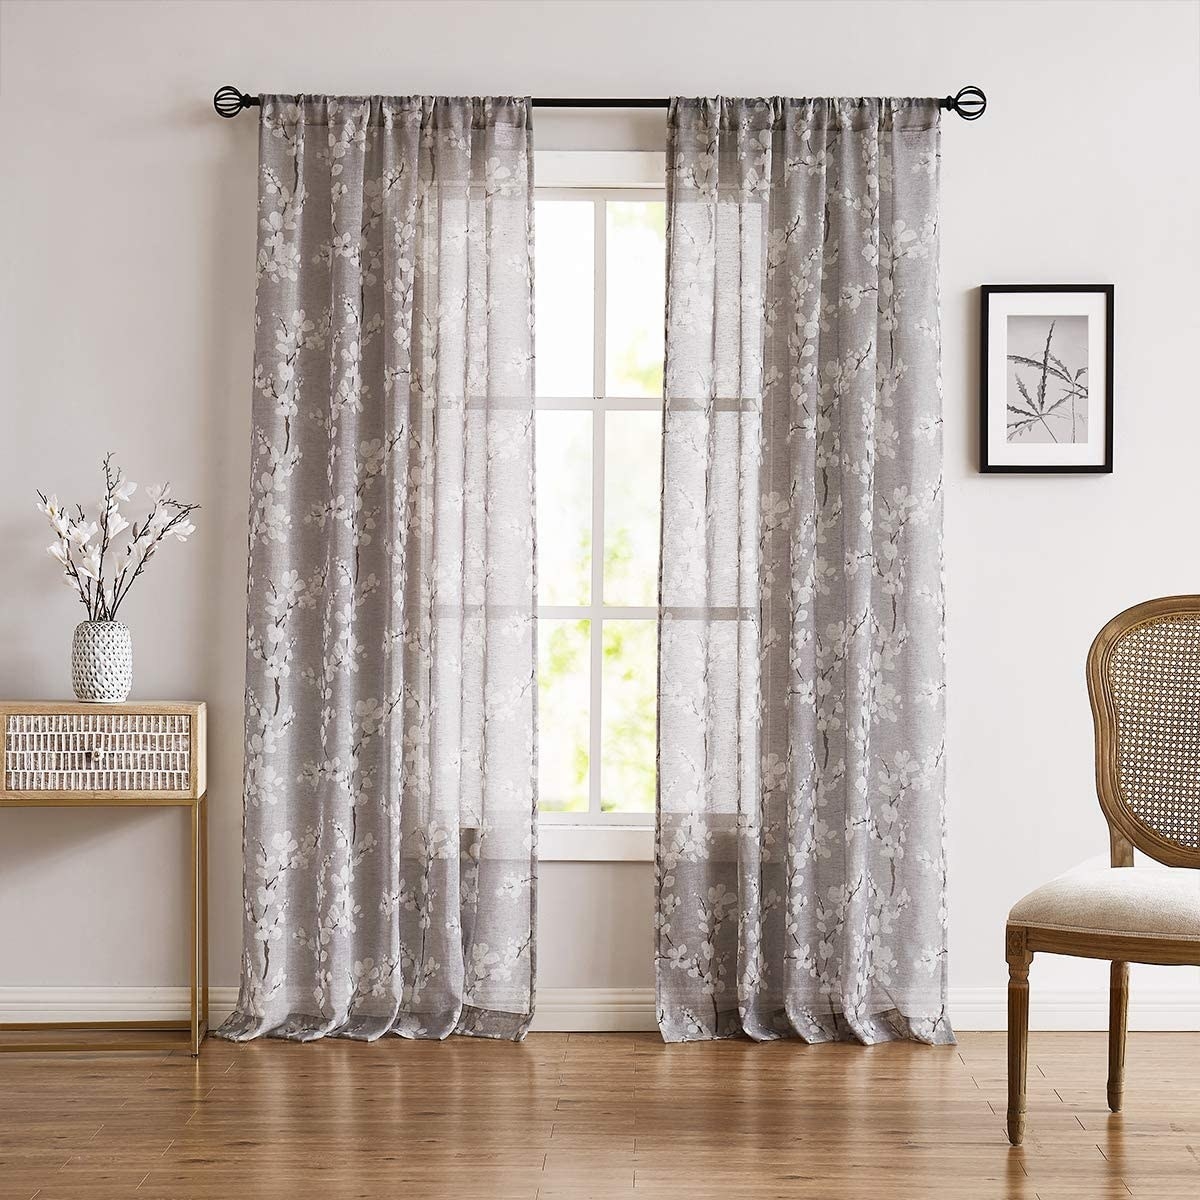 sheer curtains on a large window in a bright room